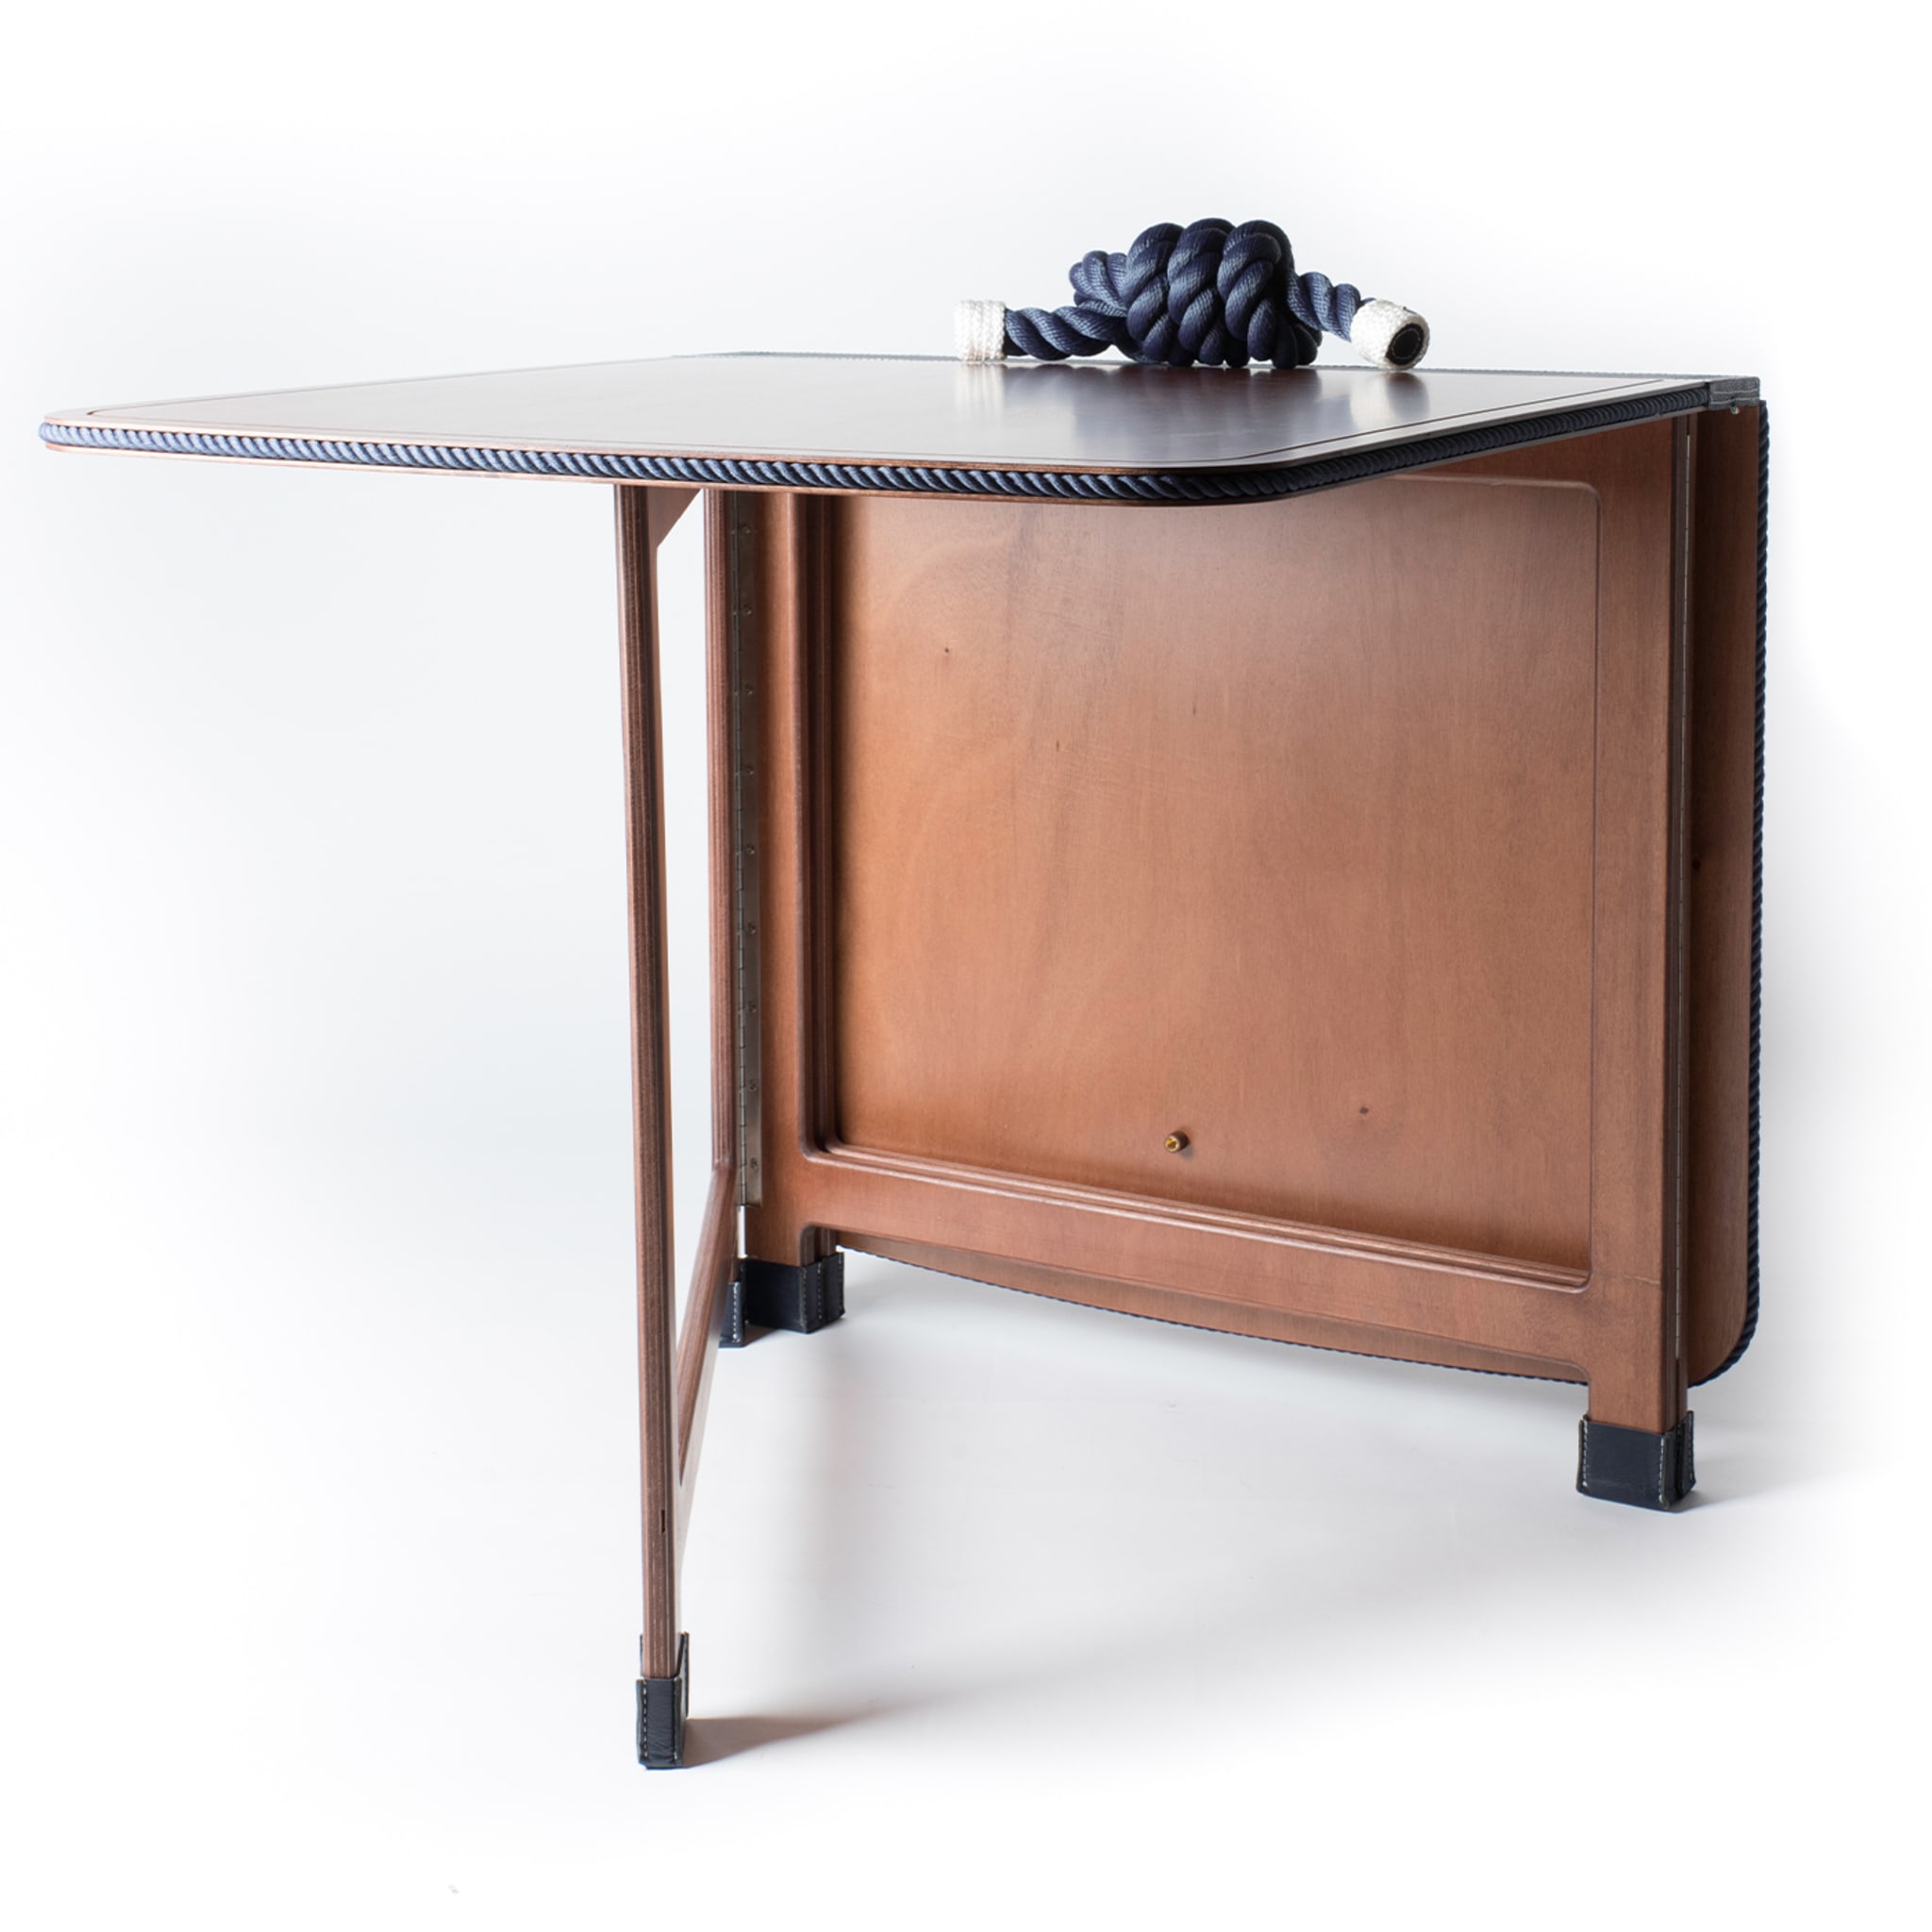 Rectangular Folding Table with Blue Eco-Leather and Rope Inserts - Alternative view 1